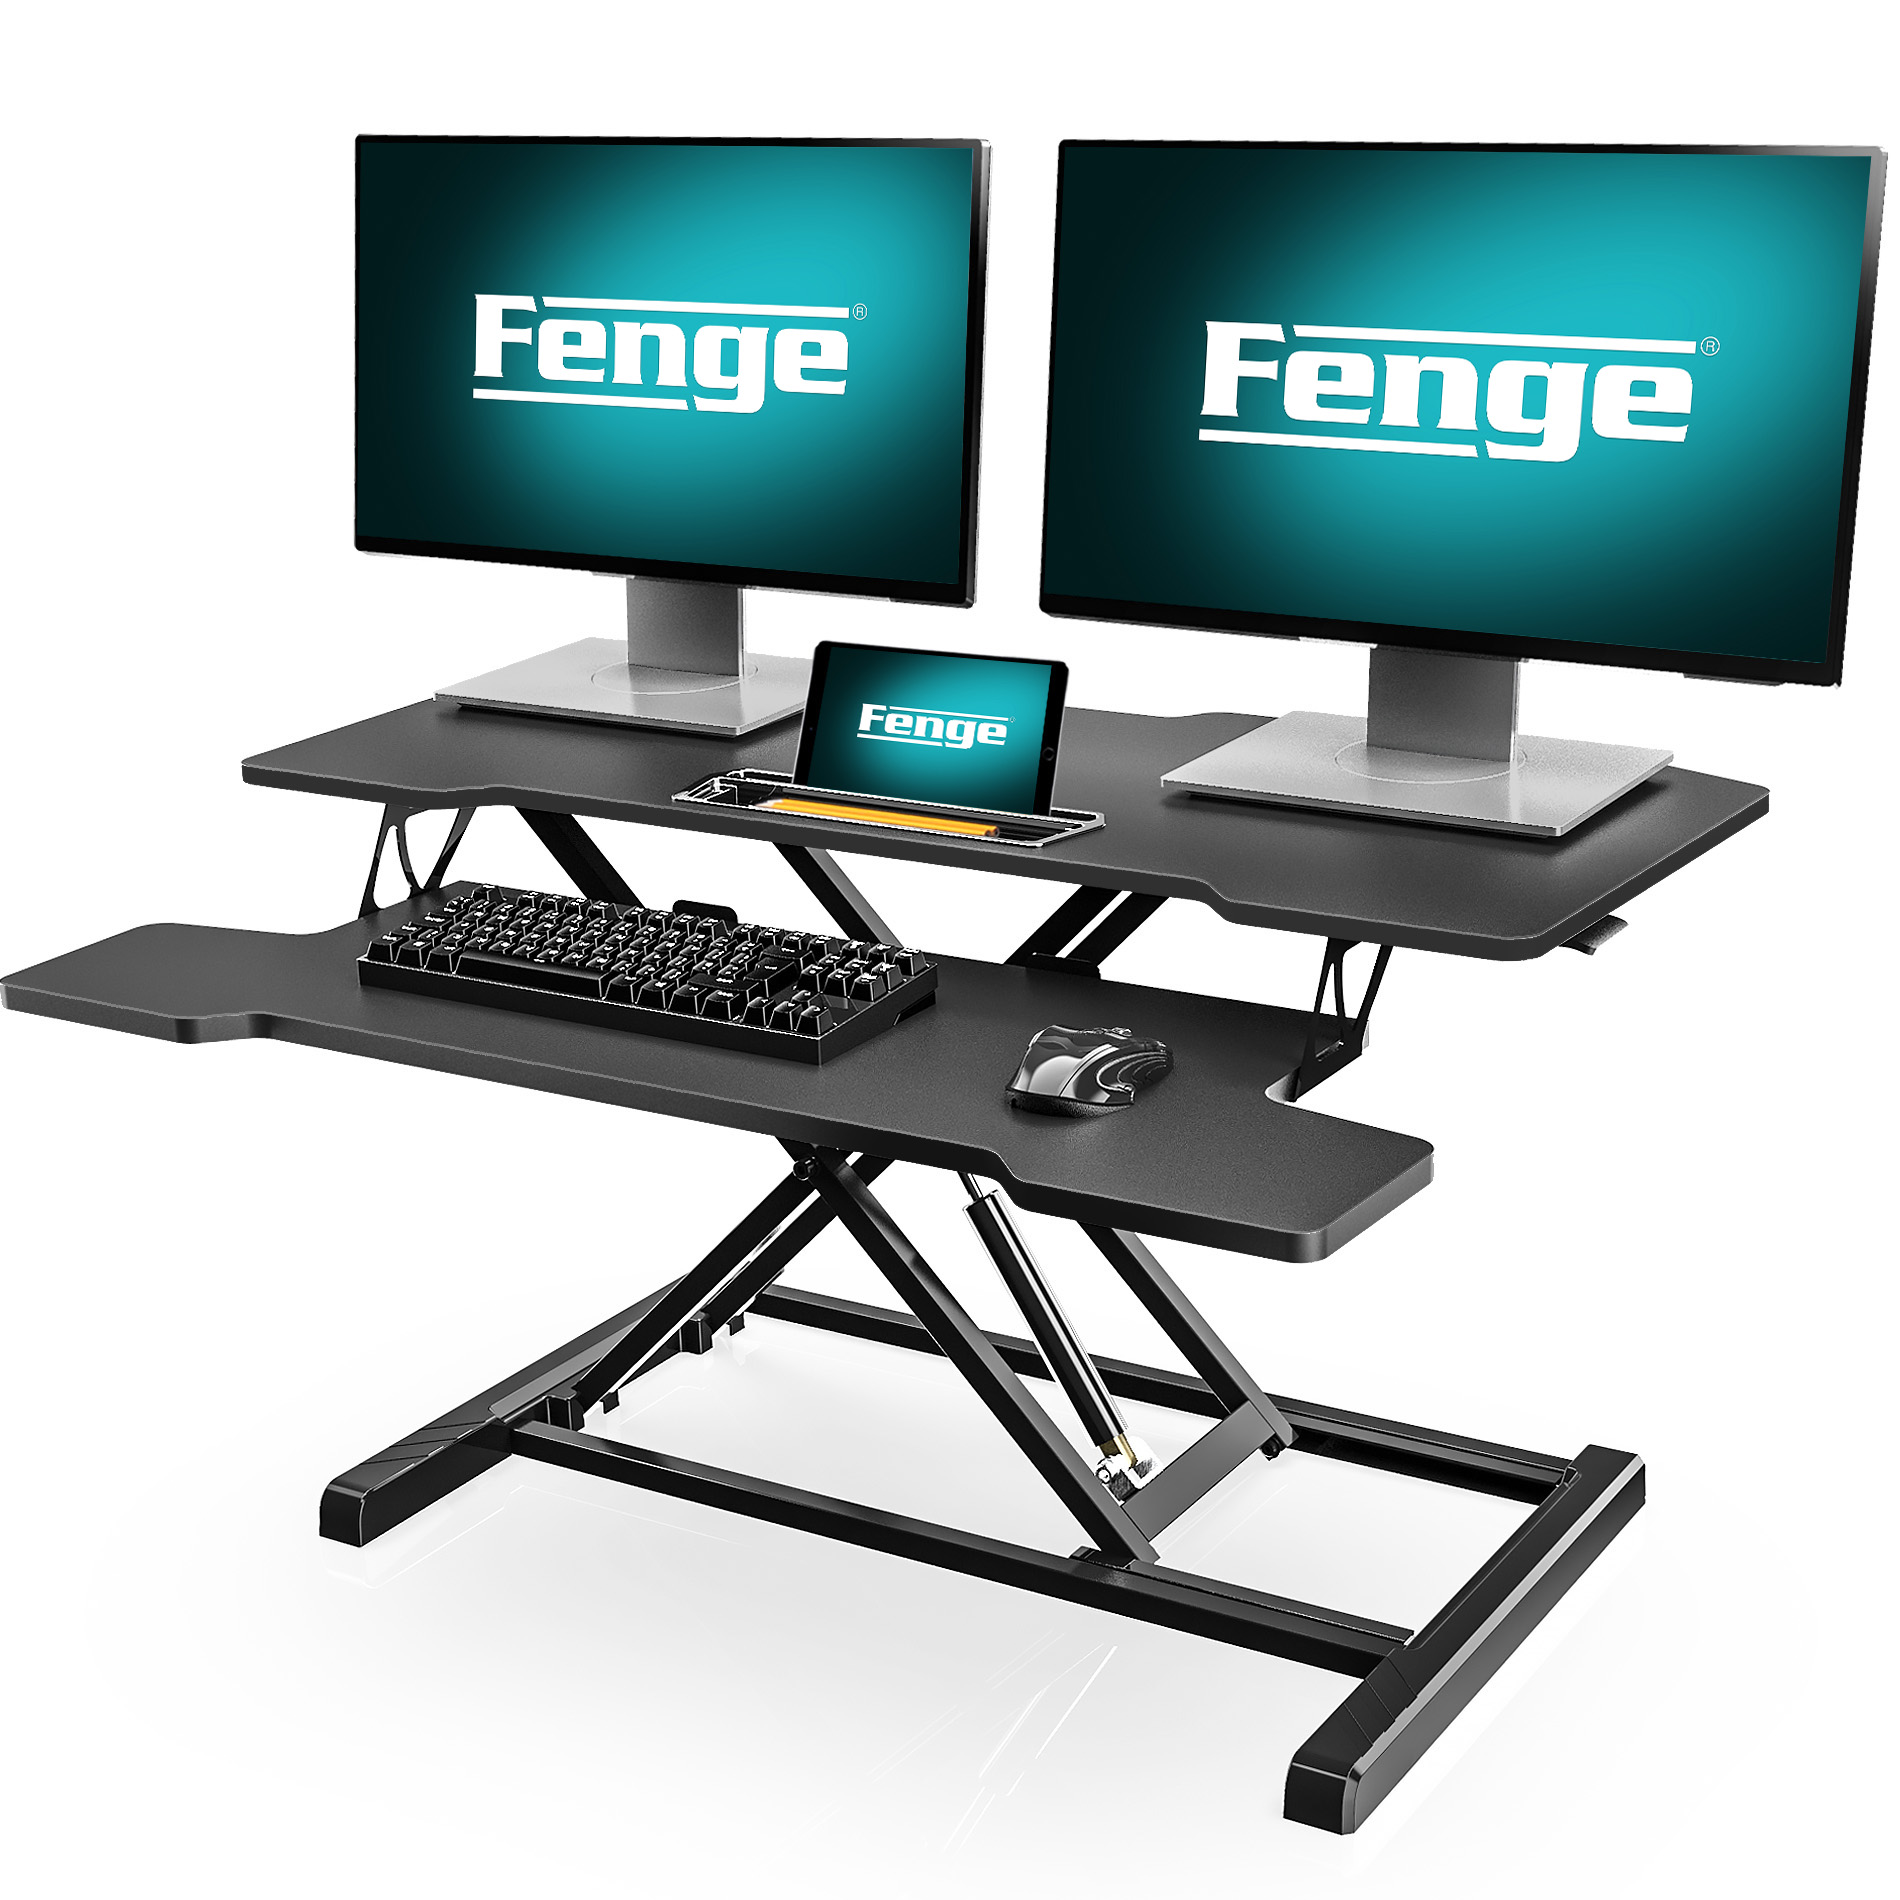 FENGE 36 inch Standing Desk Stand Adjustable Sit to Stand Up Stand Cube Stand for Laptop Monitors SD360001WB - image 1 of 6